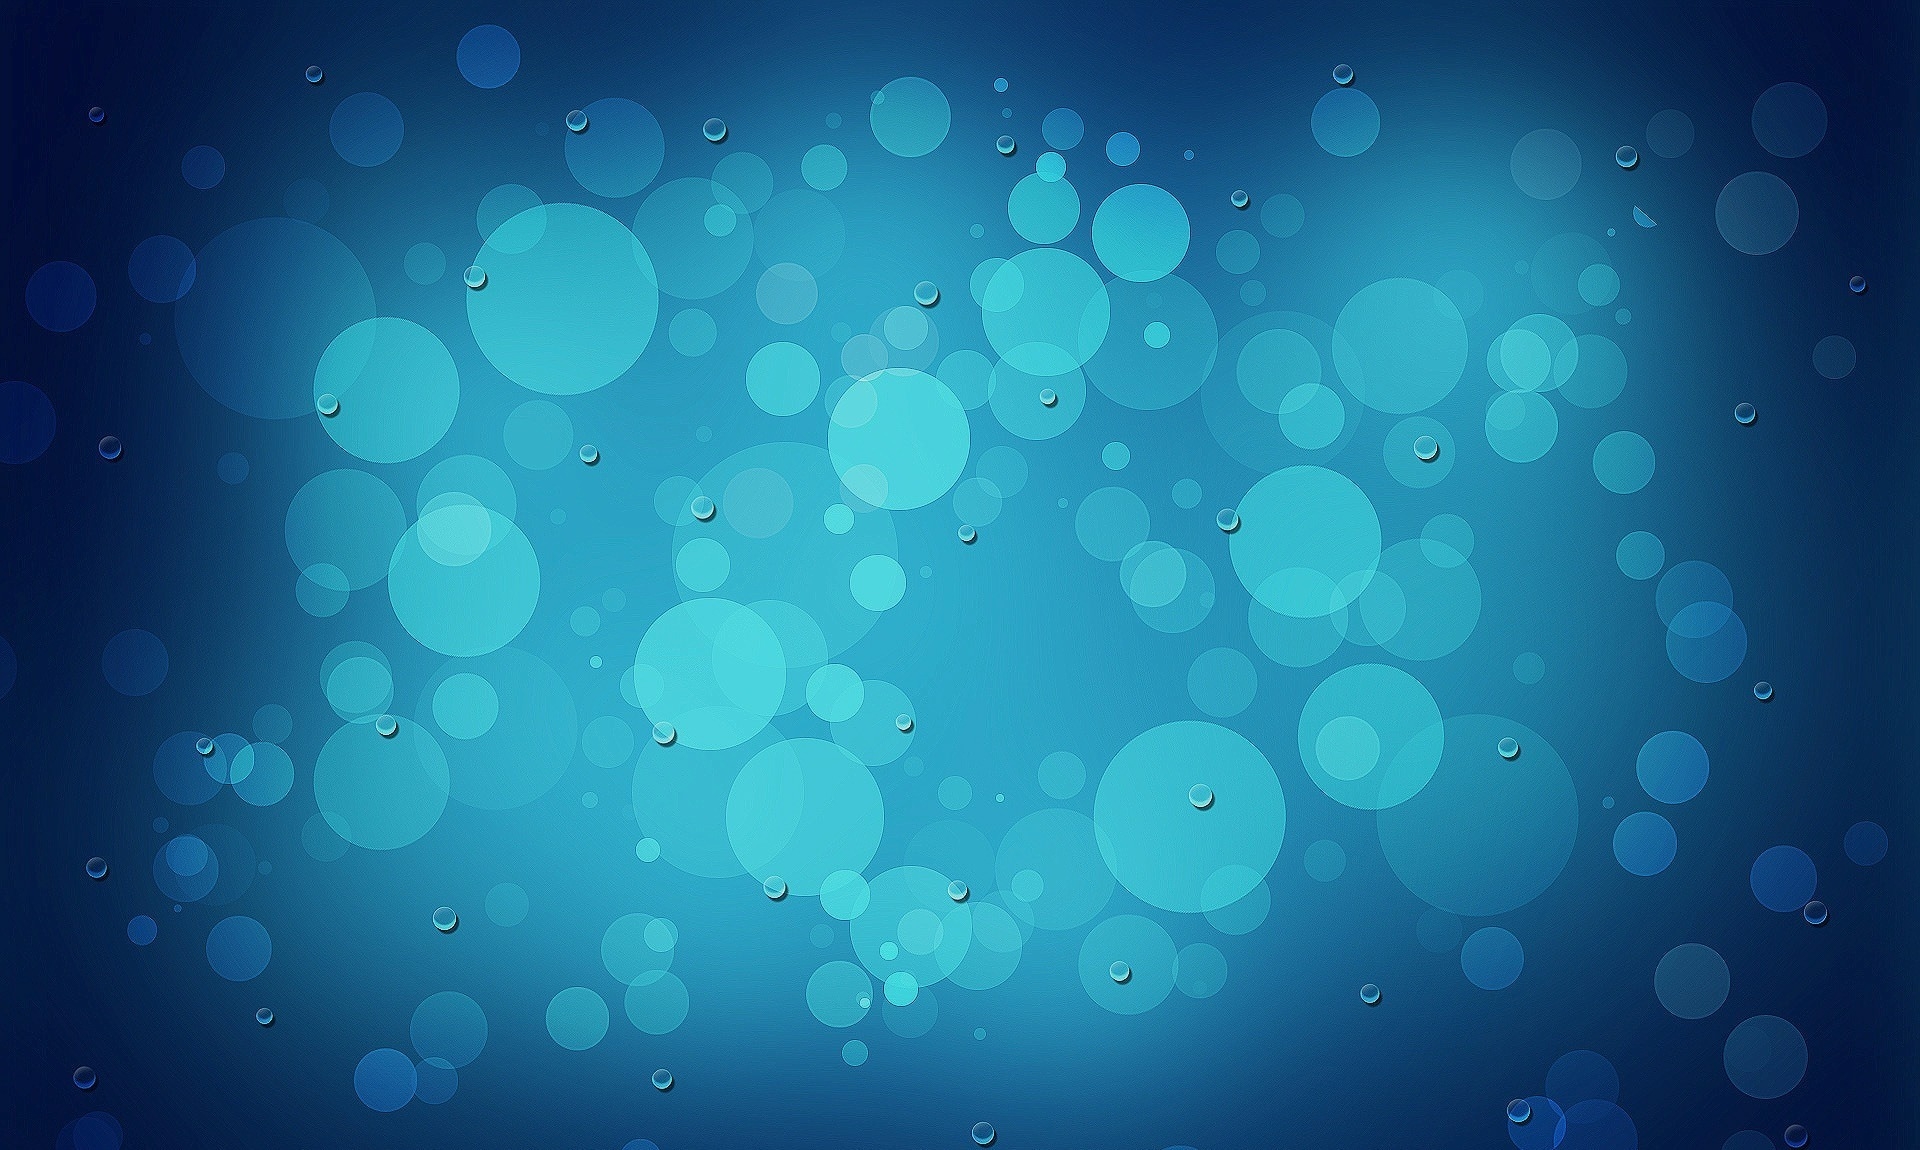 115506 download wallpaper abstract, glare, circles, shine, light, shadow, lots of, multitude screensavers and pictures for free